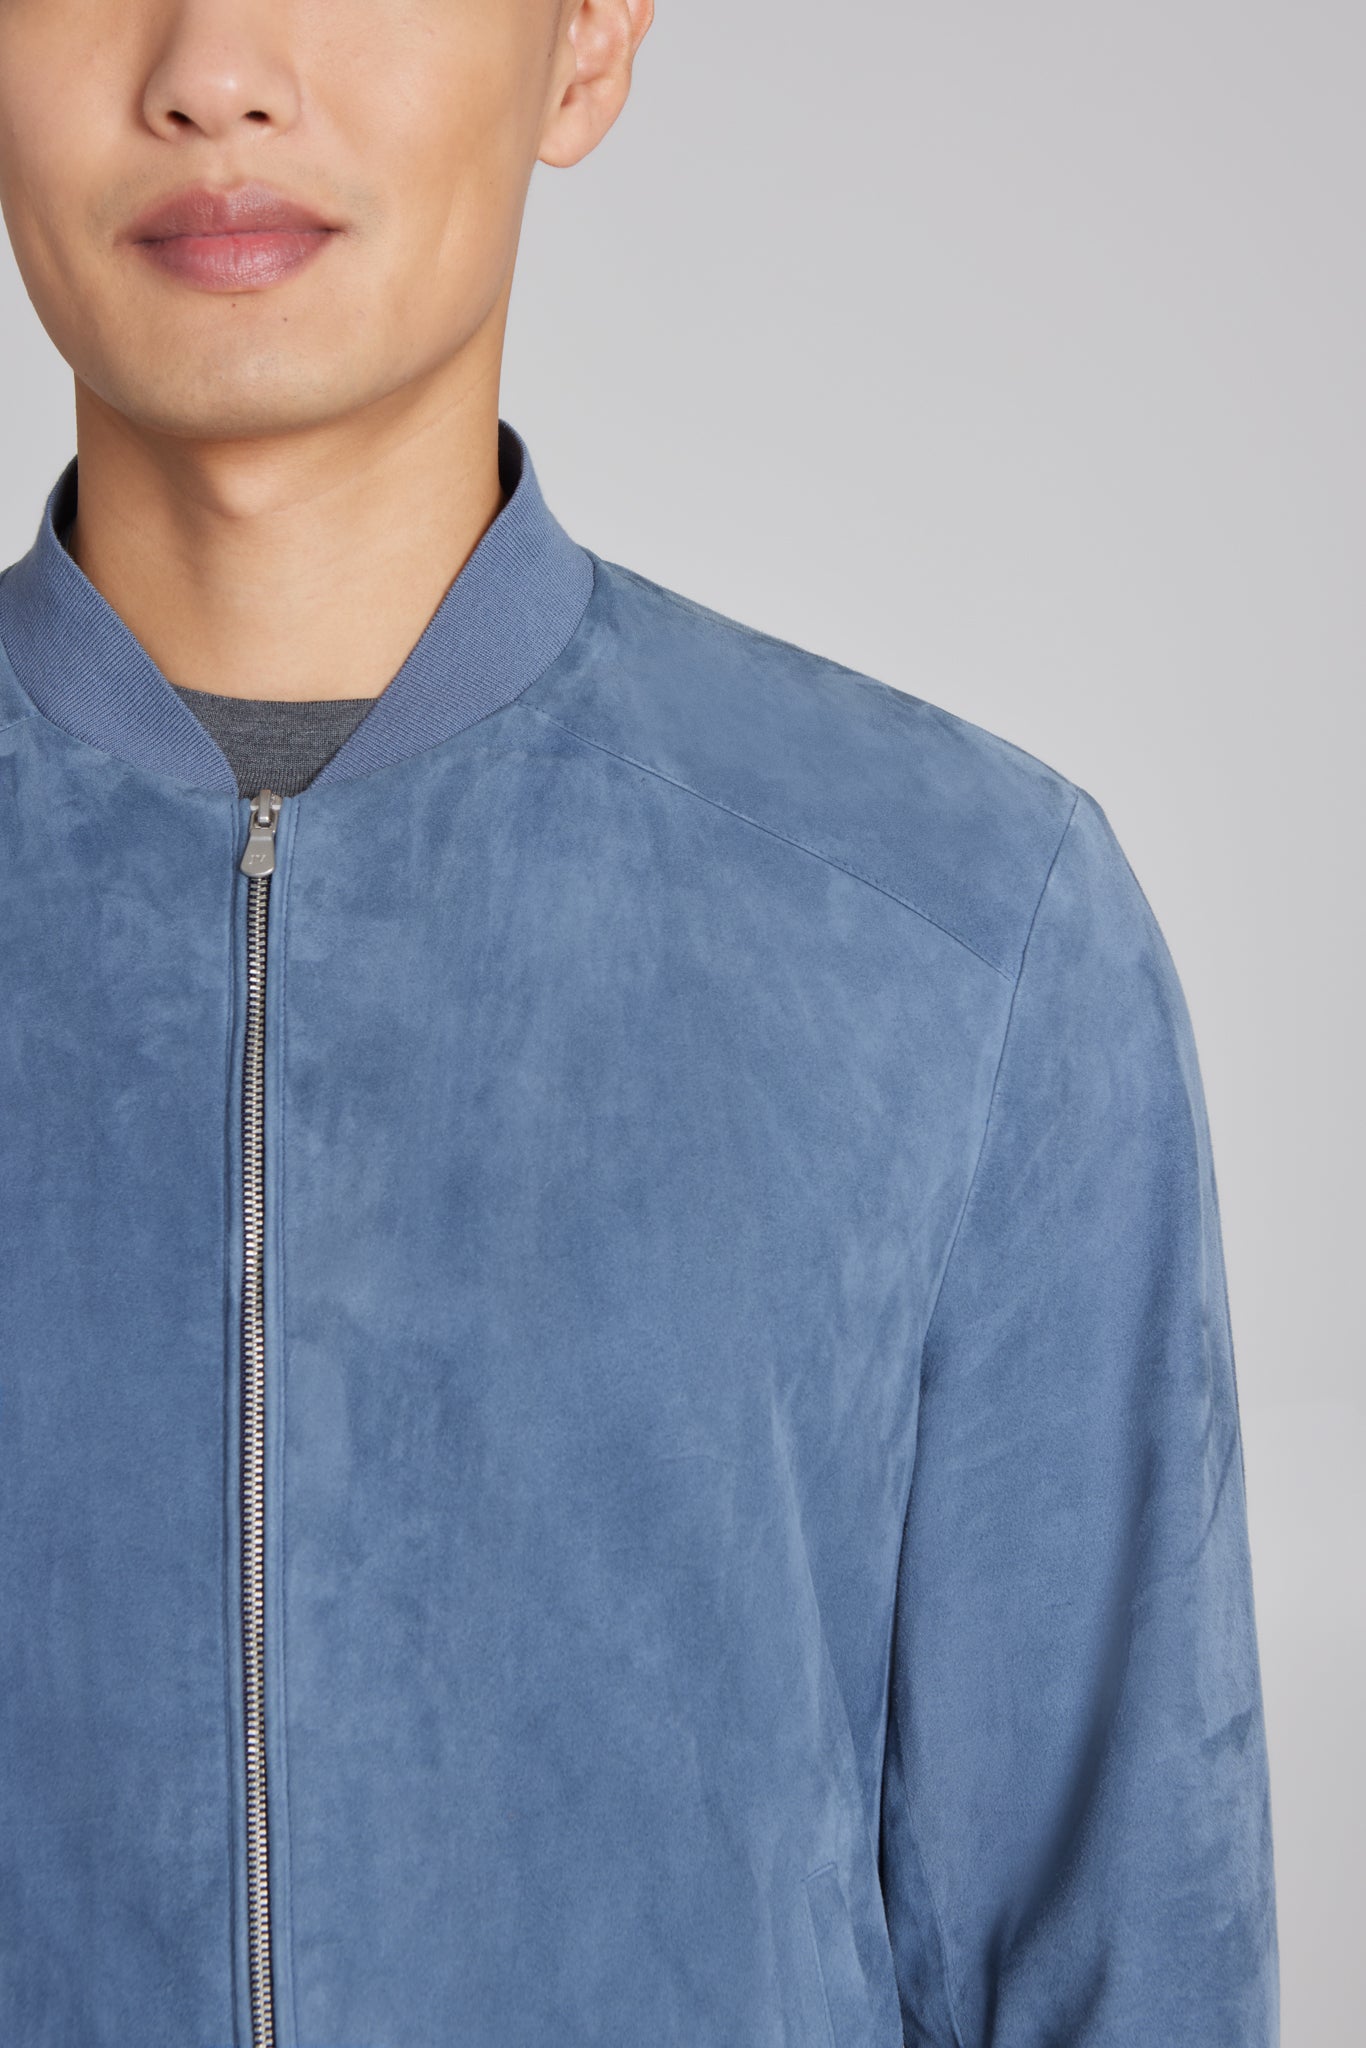 Alt view 1 Barclay Suede Bomber Jacket in Blue